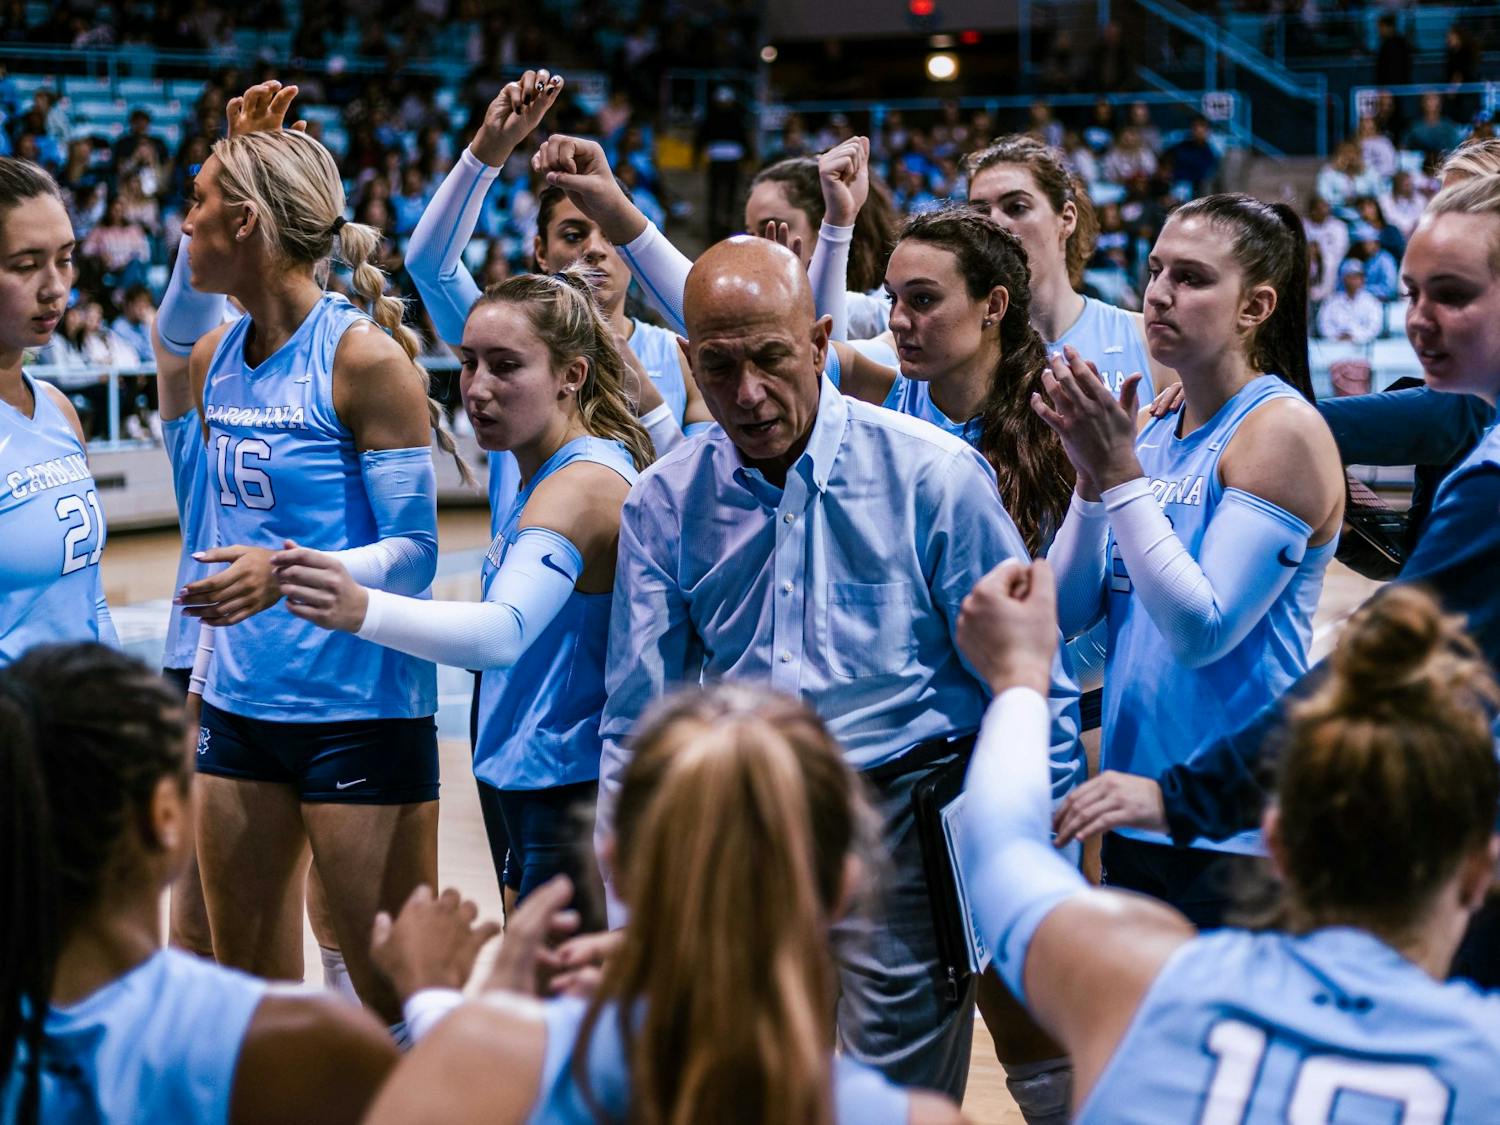 UNC head coach Joe Sagula and the team are pictured during a timeout in the third set, attempting to stave off a straight set loss in the volleyball match against Louisville on Sunday, Nov. 13, 2022. UNC fell 3-0 to Louisville.